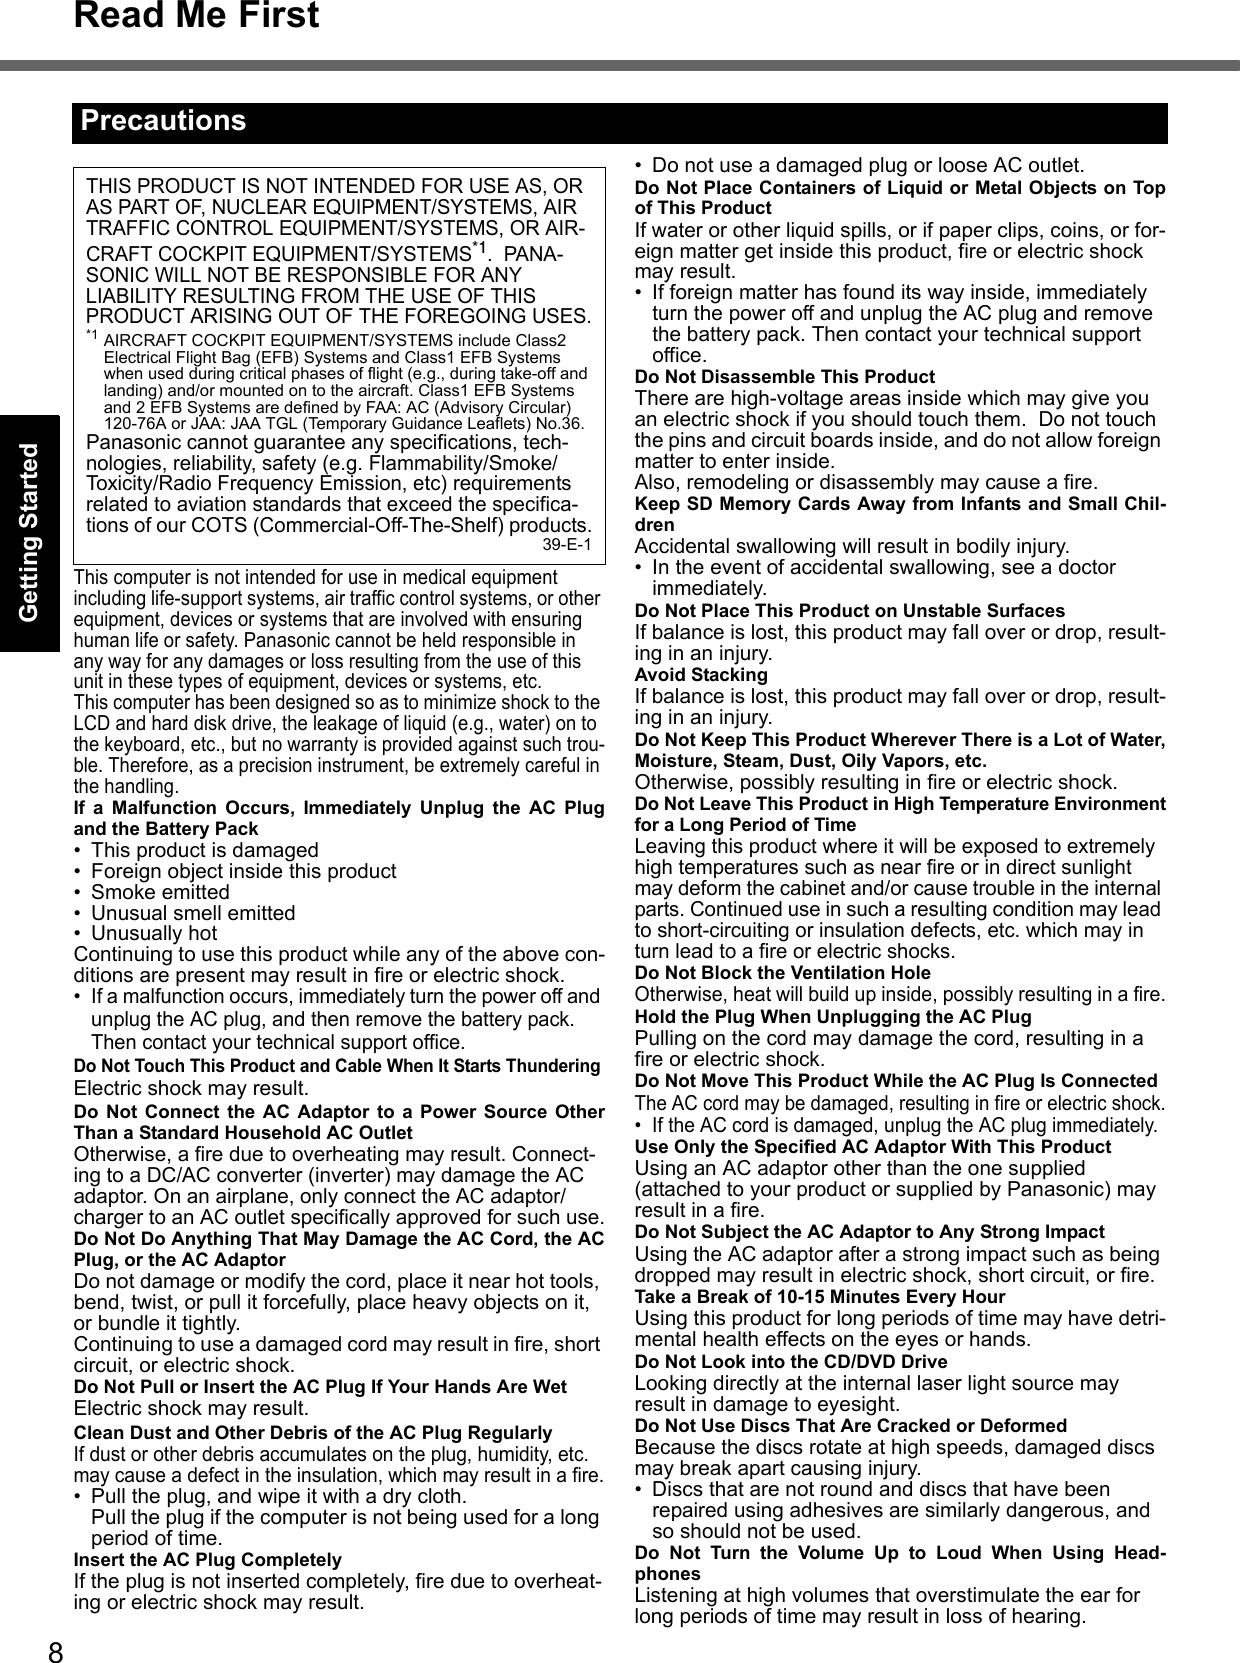 8Read Me FirstGetting StartedUseful InformationTroubleshootingAppendixThis computer is not intended for use in medical equipment including life-support systems, air traffic control systems, or other equipment, devices or systems that are involved with ensuring human life or safety. Panasonic cannot be held responsible in any way for any damages or loss resulting from the use of this unit in these types of equipment, devices or systems, etc.This computer has been designed so as to minimize shock to the LCD and hard disk drive, the leakage of liquid (e.g., water) on to the keyboard, etc., but no warranty is provided against such trou-ble. Therefore, as a precision instrument, be extremely careful in the handling.If a Malfunction Occurs, Immediately Unplug the AC Plugand the Battery Pack• This product is damaged• Foreign object inside this product• Smoke emitted• Unusual smell emitted• Unusually hotContinuing to use this product while any of the above con-ditions are present may result in fire or electric shock.• If a malfunction occurs, immediately turn the power off and unplug the AC plug, and then remove the battery pack. Then contact your technical support office.Do Not Touch This Product and Cable When It Starts ThunderingElectric shock may result.Do Not Connect the AC Adaptor to a Power Source OtherThan a Standard Household AC OutletOtherwise, a fire due to overheating may result. Connect-ing to a DC/AC converter (inverter) may damage the AC adaptor. On an airplane, only connect the AC adaptor/charger to an AC outlet specifically approved for such use.Do Not Do Anything That May Damage the AC Cord, the ACPlug, or the AC AdaptorDo not damage or modify the cord, place it near hot tools, bend, twist, or pull it forcefully, place heavy objects on it, or bundle it tightly.Continuing to use a damaged cord may result in fire, short circuit, or electric shock.Do Not Pull or Insert the AC Plug If Your Hands Are WetElectric shock may result.Clean Dust and Other Debris of the AC Plug RegularlyIf dust or other debris accumulates on the plug, humidity, etc. may cause a defect in the insulation, which may result in a fire.• Pull the plug, and wipe it with a dry cloth.Pull the plug if the computer is not being used for a long period of time.Insert the AC Plug CompletelyIf the plug is not inserted completely, fire due to overheat-ing or electric shock may result.• Do not use a damaged plug or loose AC outlet.Do Not Place Containers of Liquid or Metal Objects on Topof This ProductIf water or other liquid spills, or if paper clips, coins, or for-eign matter get inside this product, fire or electric shock may result.• If foreign matter has found its way inside, immediately turn the power off and unplug the AC plug and remove the battery pack. Then contact your technical support office.Do Not Disassemble This ProductThere are high-voltage areas inside which may give you an electric shock if you should touch them.  Do not touch the pins and circuit boards inside, and do not allow foreign matter to enter inside.Also, remodeling or disassembly may cause a fire.Keep SD Memory Cards Away from Infants and Small Chil-drenAccidental swallowing will result in bodily injury.• In the event of accidental swallowing, see a doctor immediately.Do Not Place This Product on Unstable SurfacesIf balance is lost, this product may fall over or drop, result-ing in an injury.Avoid StackingIf balance is lost, this product may fall over or drop, result-ing in an injury.Do Not Keep This Product Wherever There is a Lot of Water,Moisture, Steam, Dust, Oily Vapors, etc.Otherwise, possibly resulting in fire or electric shock.Do Not Leave This Product in High Temperature Environmentfor a Long Period of TimeLeaving this product where it will be exposed to extremely high temperatures such as near fire or in direct sunlight may deform the cabinet and/or cause trouble in the internal parts. Continued use in such a resulting condition may lead to short-circuiting or insulation defects, etc. which may in turn lead to a fire or electric shocks.Do Not Block the Ventilation HoleOtherwise, heat will build up inside, possibly resulting in a fire.Hold the Plug When Unplugging the AC PlugPulling on the cord may damage the cord, resulting in a fire or electric shock.Do Not Move This Product While the AC Plug Is ConnectedThe AC cord may be damaged, resulting in fire or electric shock.• If the AC cord is damaged, unplug the AC plug immediately.Use Only the Specified AC Adaptor With This ProductUsing an AC adaptor other than the one supplied (attached to your product or supplied by Panasonic) may result in a fire.Do Not Subject the AC Adaptor to Any Strong ImpactUsing the AC adaptor after a strong impact such as being dropped may result in electric shock, short circuit, or fire.Take a Break of 10-15 Minutes Every HourUsing this product for long periods of time may have detri-mental health effects on the eyes or hands.Do Not Look into the CD/DVD DriveLooking directly at the internal laser light source may result in damage to eyesight.Do Not Use Discs That Are Cracked or DeformedBecause the discs rotate at high speeds, damaged discs may break apart causing injury.• Discs that are not round and discs that have been repaired using adhesives are similarly dangerous, and so should not be used.Do Not Turn the Volume Up to Loud When Using Head-phonesListening at high volumes that overstimulate the ear for long periods of time may result in loss of hearing.PrecautionsTHIS PRODUCT IS NOT INTENDED FOR USE AS, OR AS PART OF, NUCLEAR EQUIPMENT/SYSTEMS, AIR TRAFFIC CONTROL EQUIPMENT/SYSTEMS, OR AIR-CRAFT COCKPIT EQUIPMENT/SYSTEMS*1.  PANA-SONIC WILL NOT BE RESPONSIBLE FOR ANY LIABILITY RESULTING FROM THE USE OF THIS PRODUCT ARISING OUT OF THE FOREGOING USES.*1 AIRCRAFT COCKPIT EQUIPMENT/SYSTEMS include Class2 Electrical Flight Bag (EFB) Systems and Class1 EFB Systems when used during critical phases of flight (e.g., during take-off and landing) and/or mounted on to the aircraft. Class1 EFB Systems and 2 EFB Systems are defined by FAA: AC (Advisory Circular) 120-76A or JAA: JAA TGL (Temporary Guidance Leaflets) No.36.Panasonic cannot guarantee any specifications, tech-nologies, reliability, safety (e.g. Flammability/Smoke/Toxicity/Radio Frequency Emission, etc) requirements related to aviation standards that exceed the specifica-tions of our COTS (Commercial-Off-The-Shelf) products.39-E-1